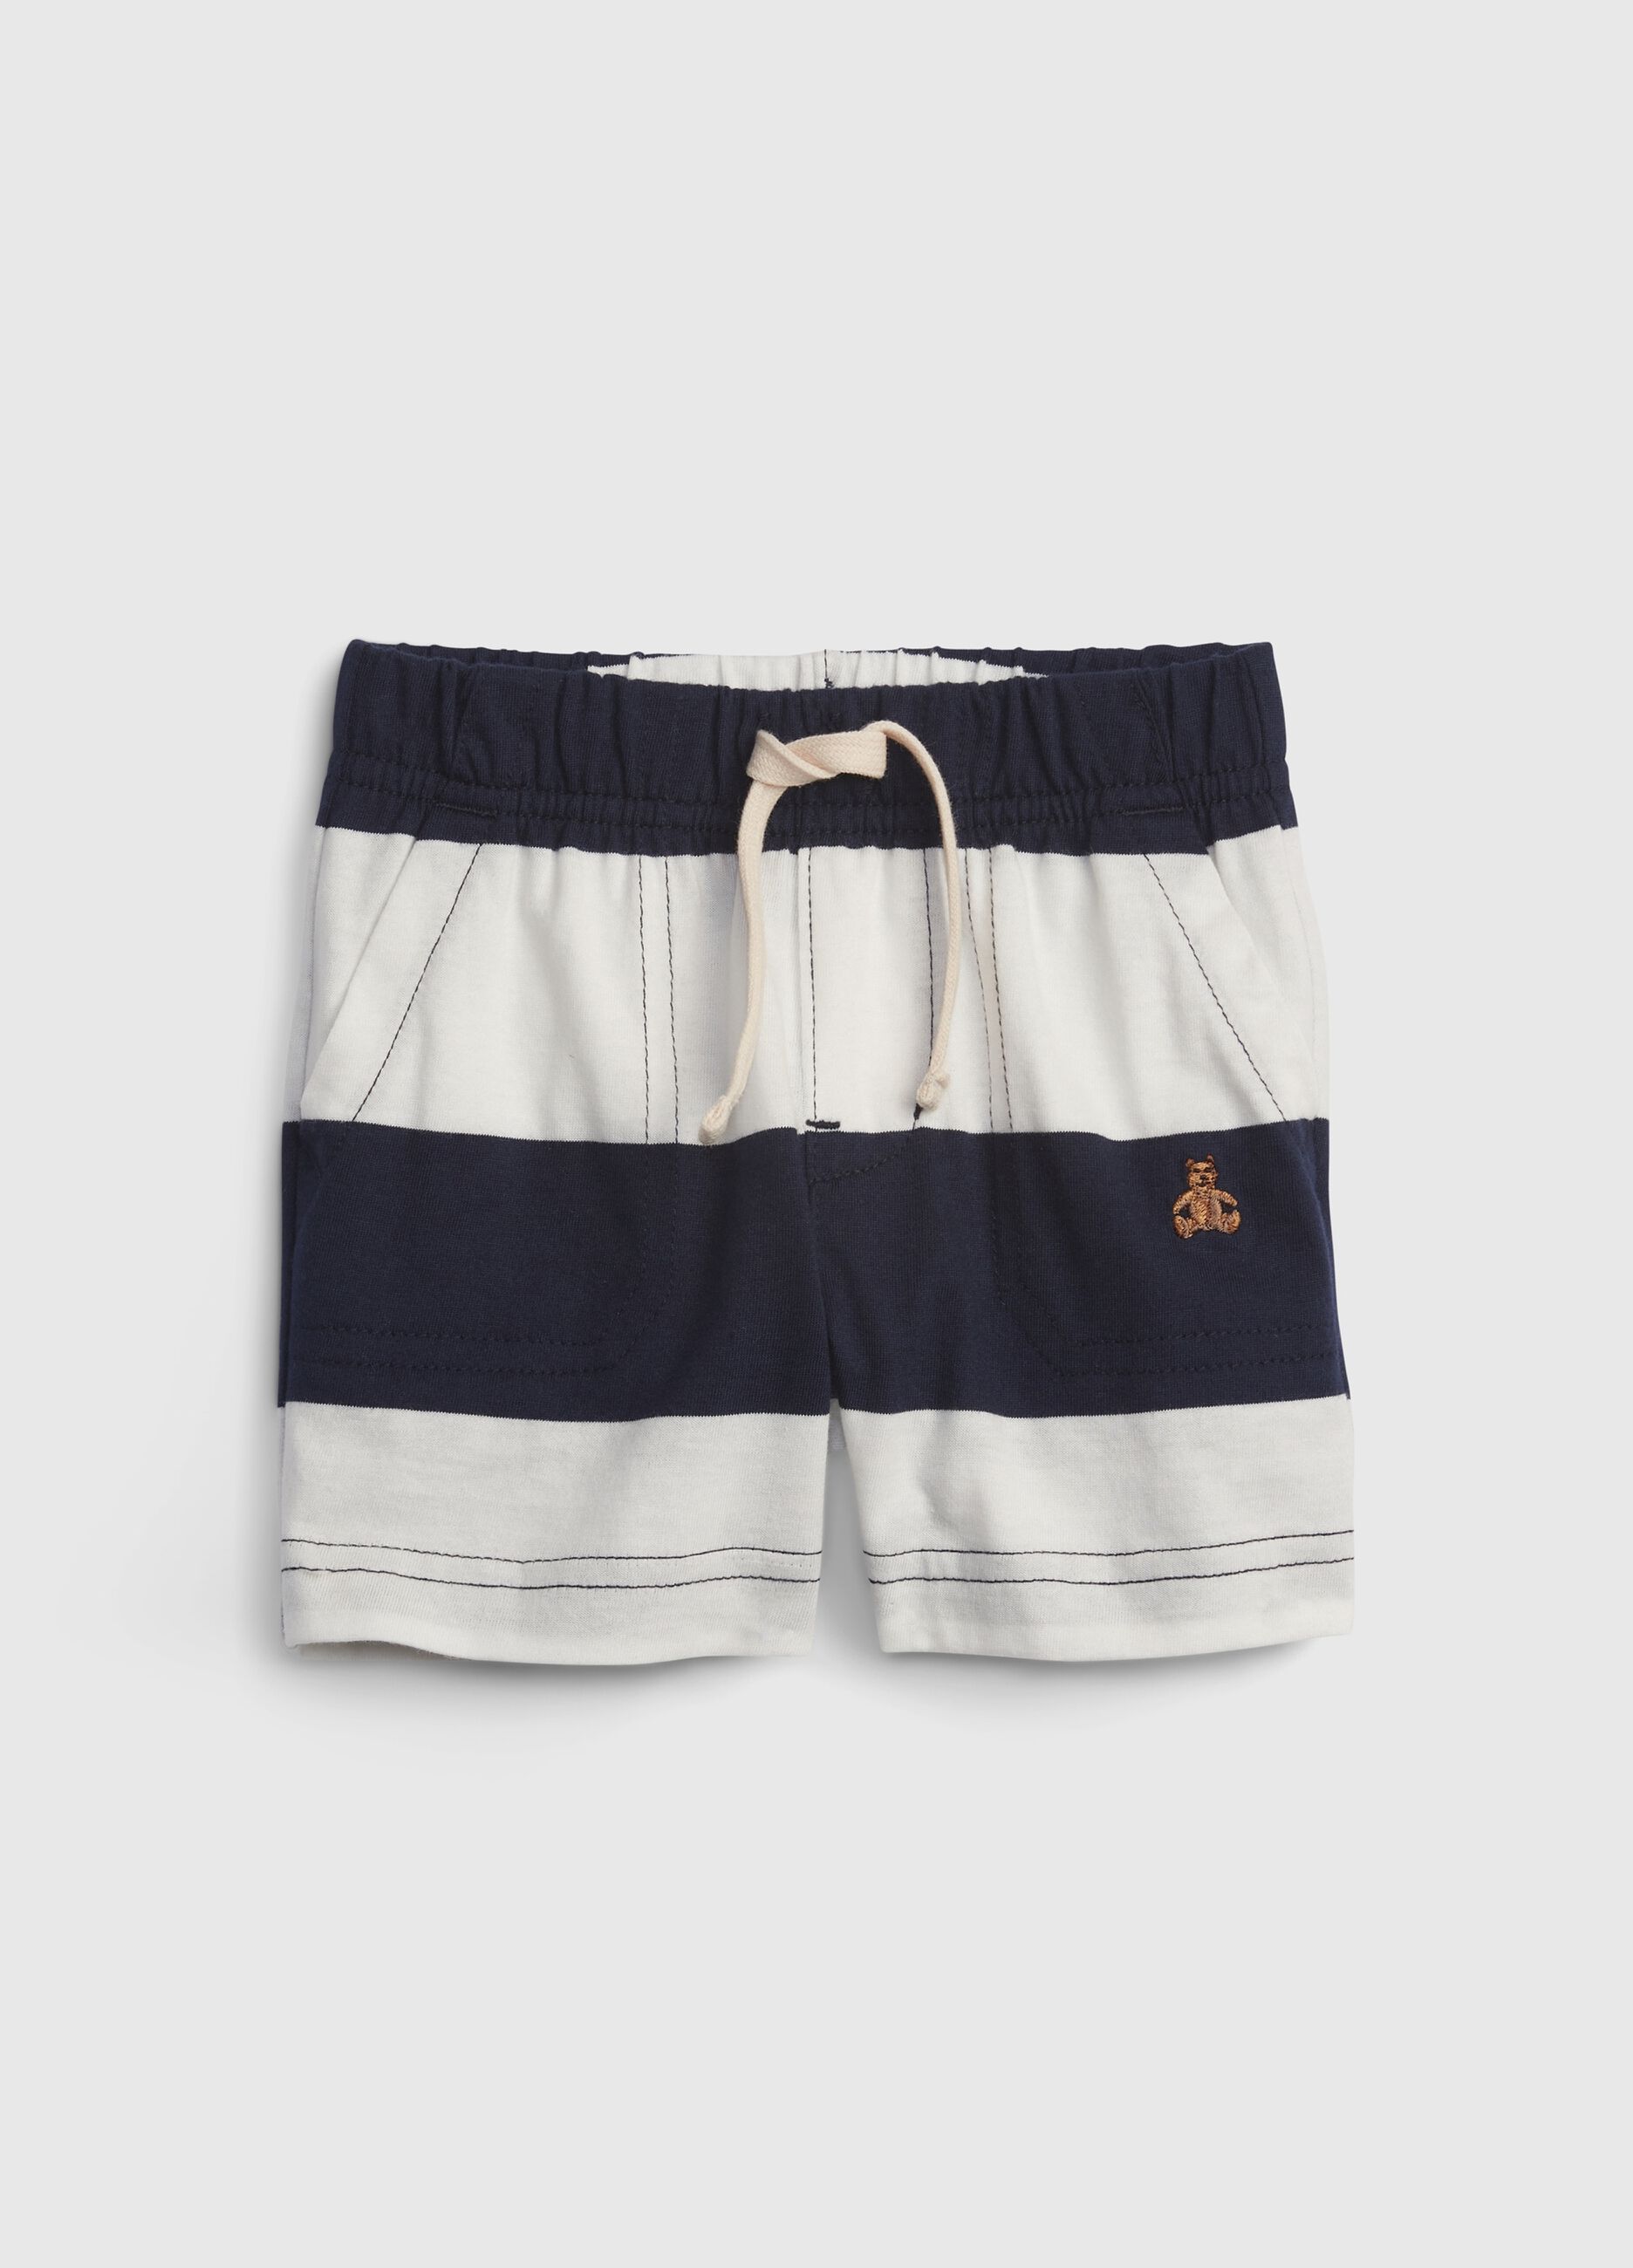 Striped shorts with teddy bear embroidery